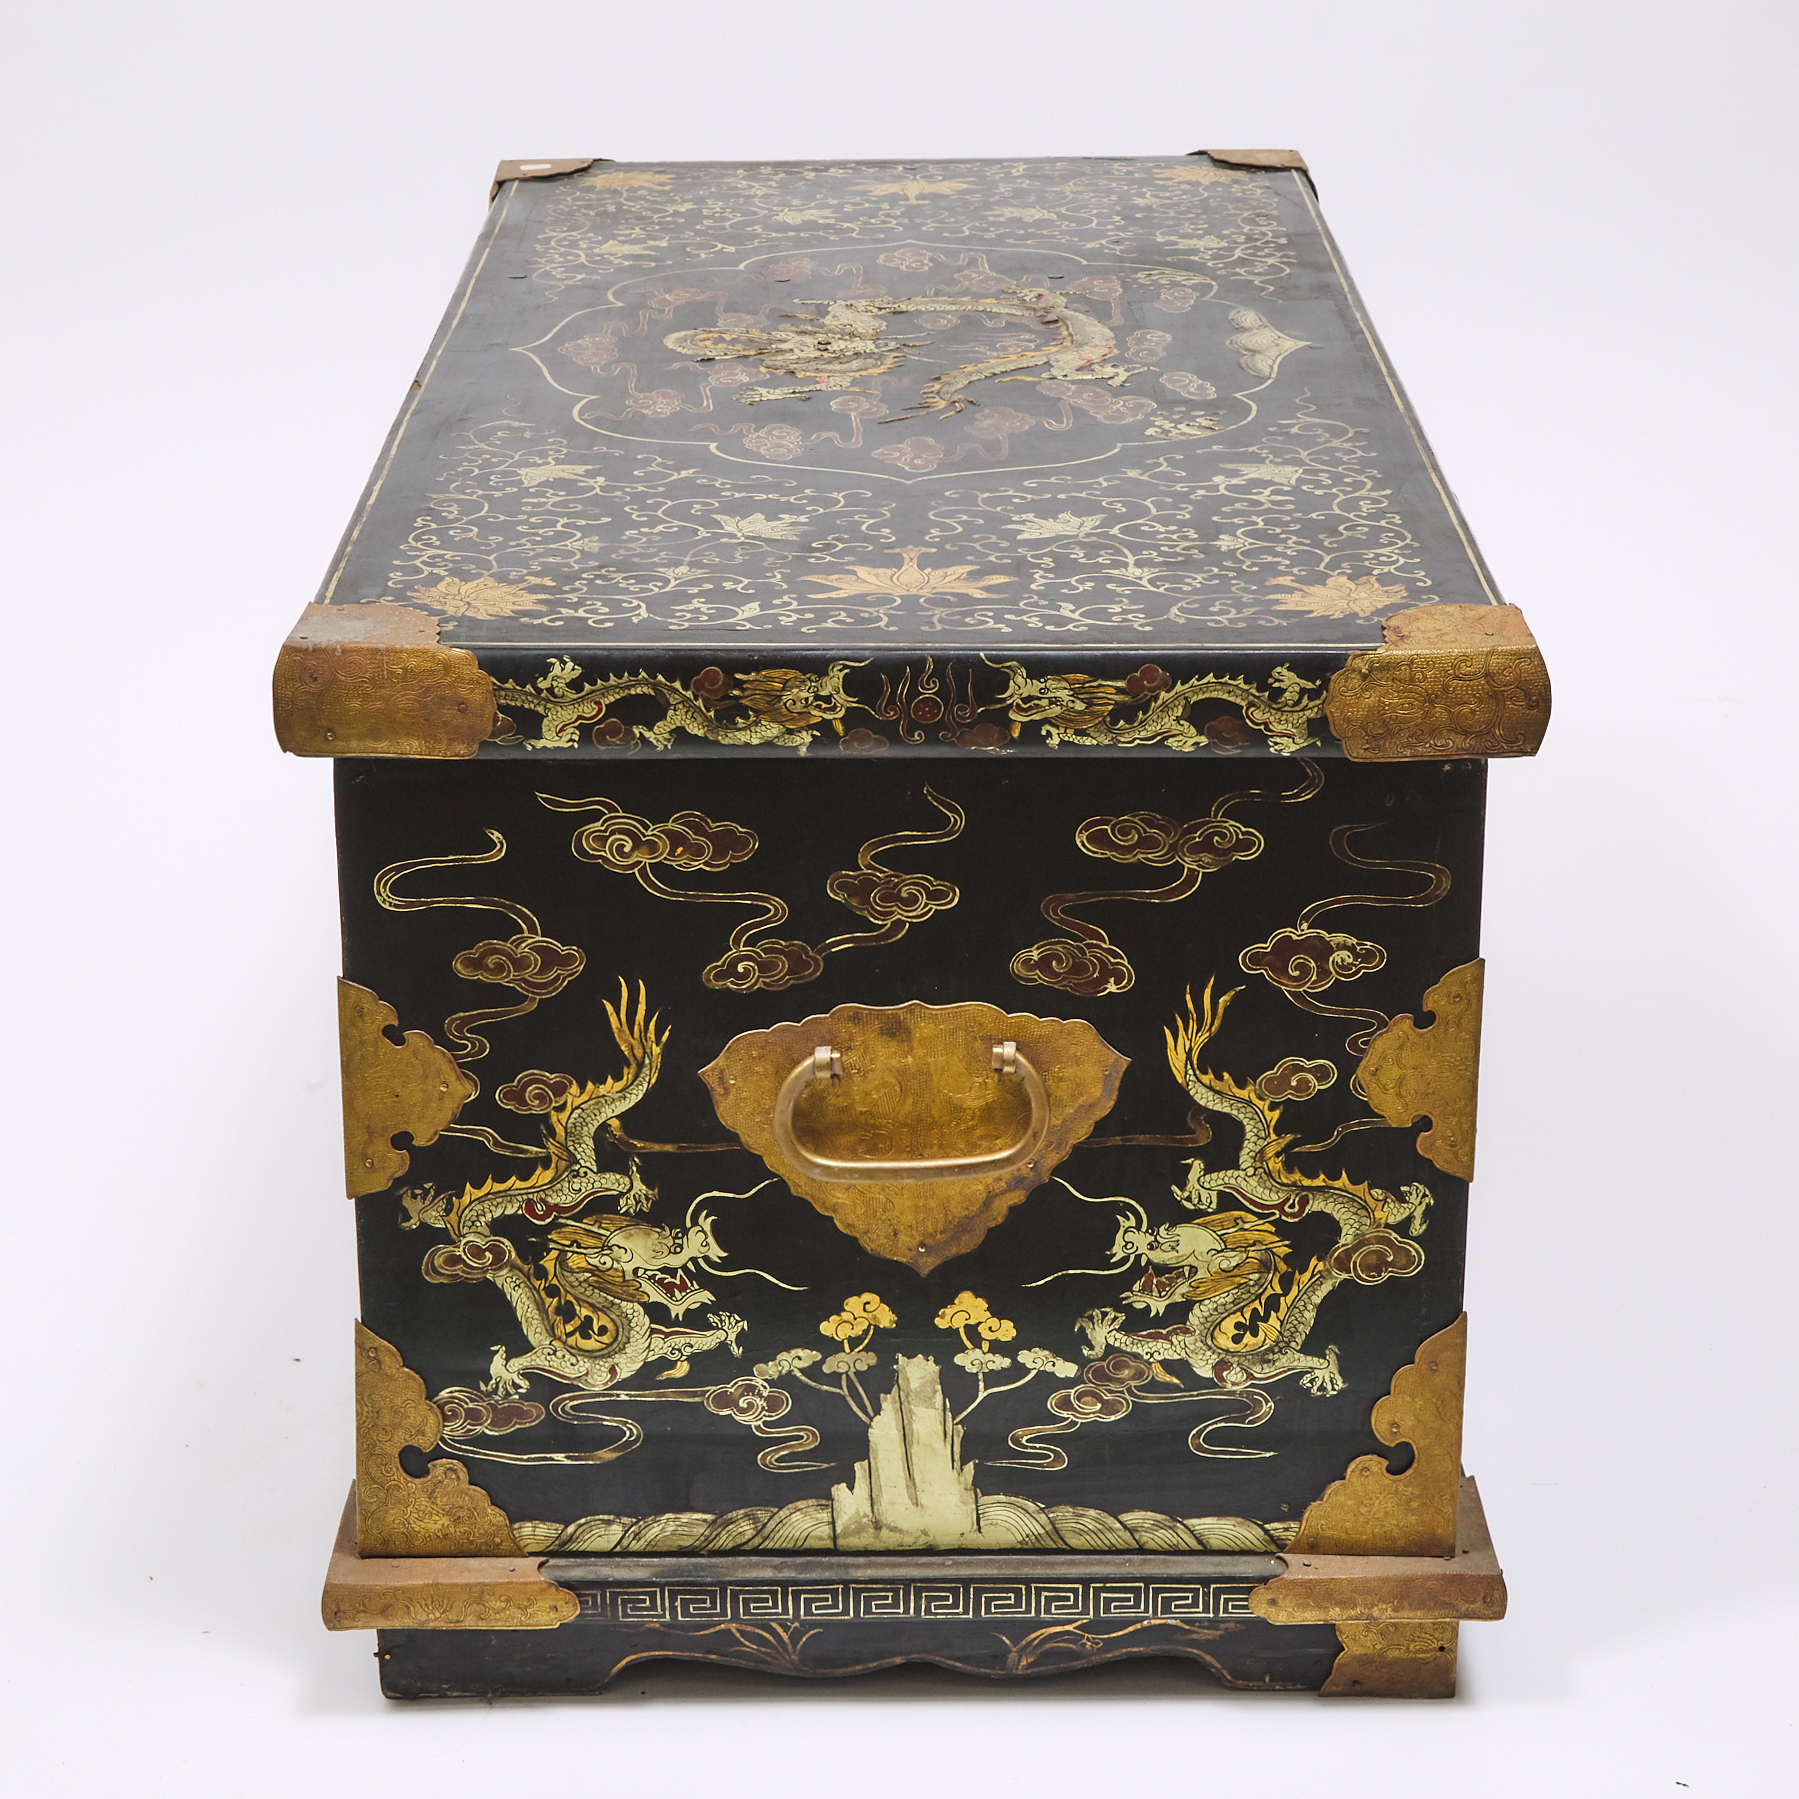 A Large Gold-Painted Black Lacquer 'Dragon' Chest, 19th Century